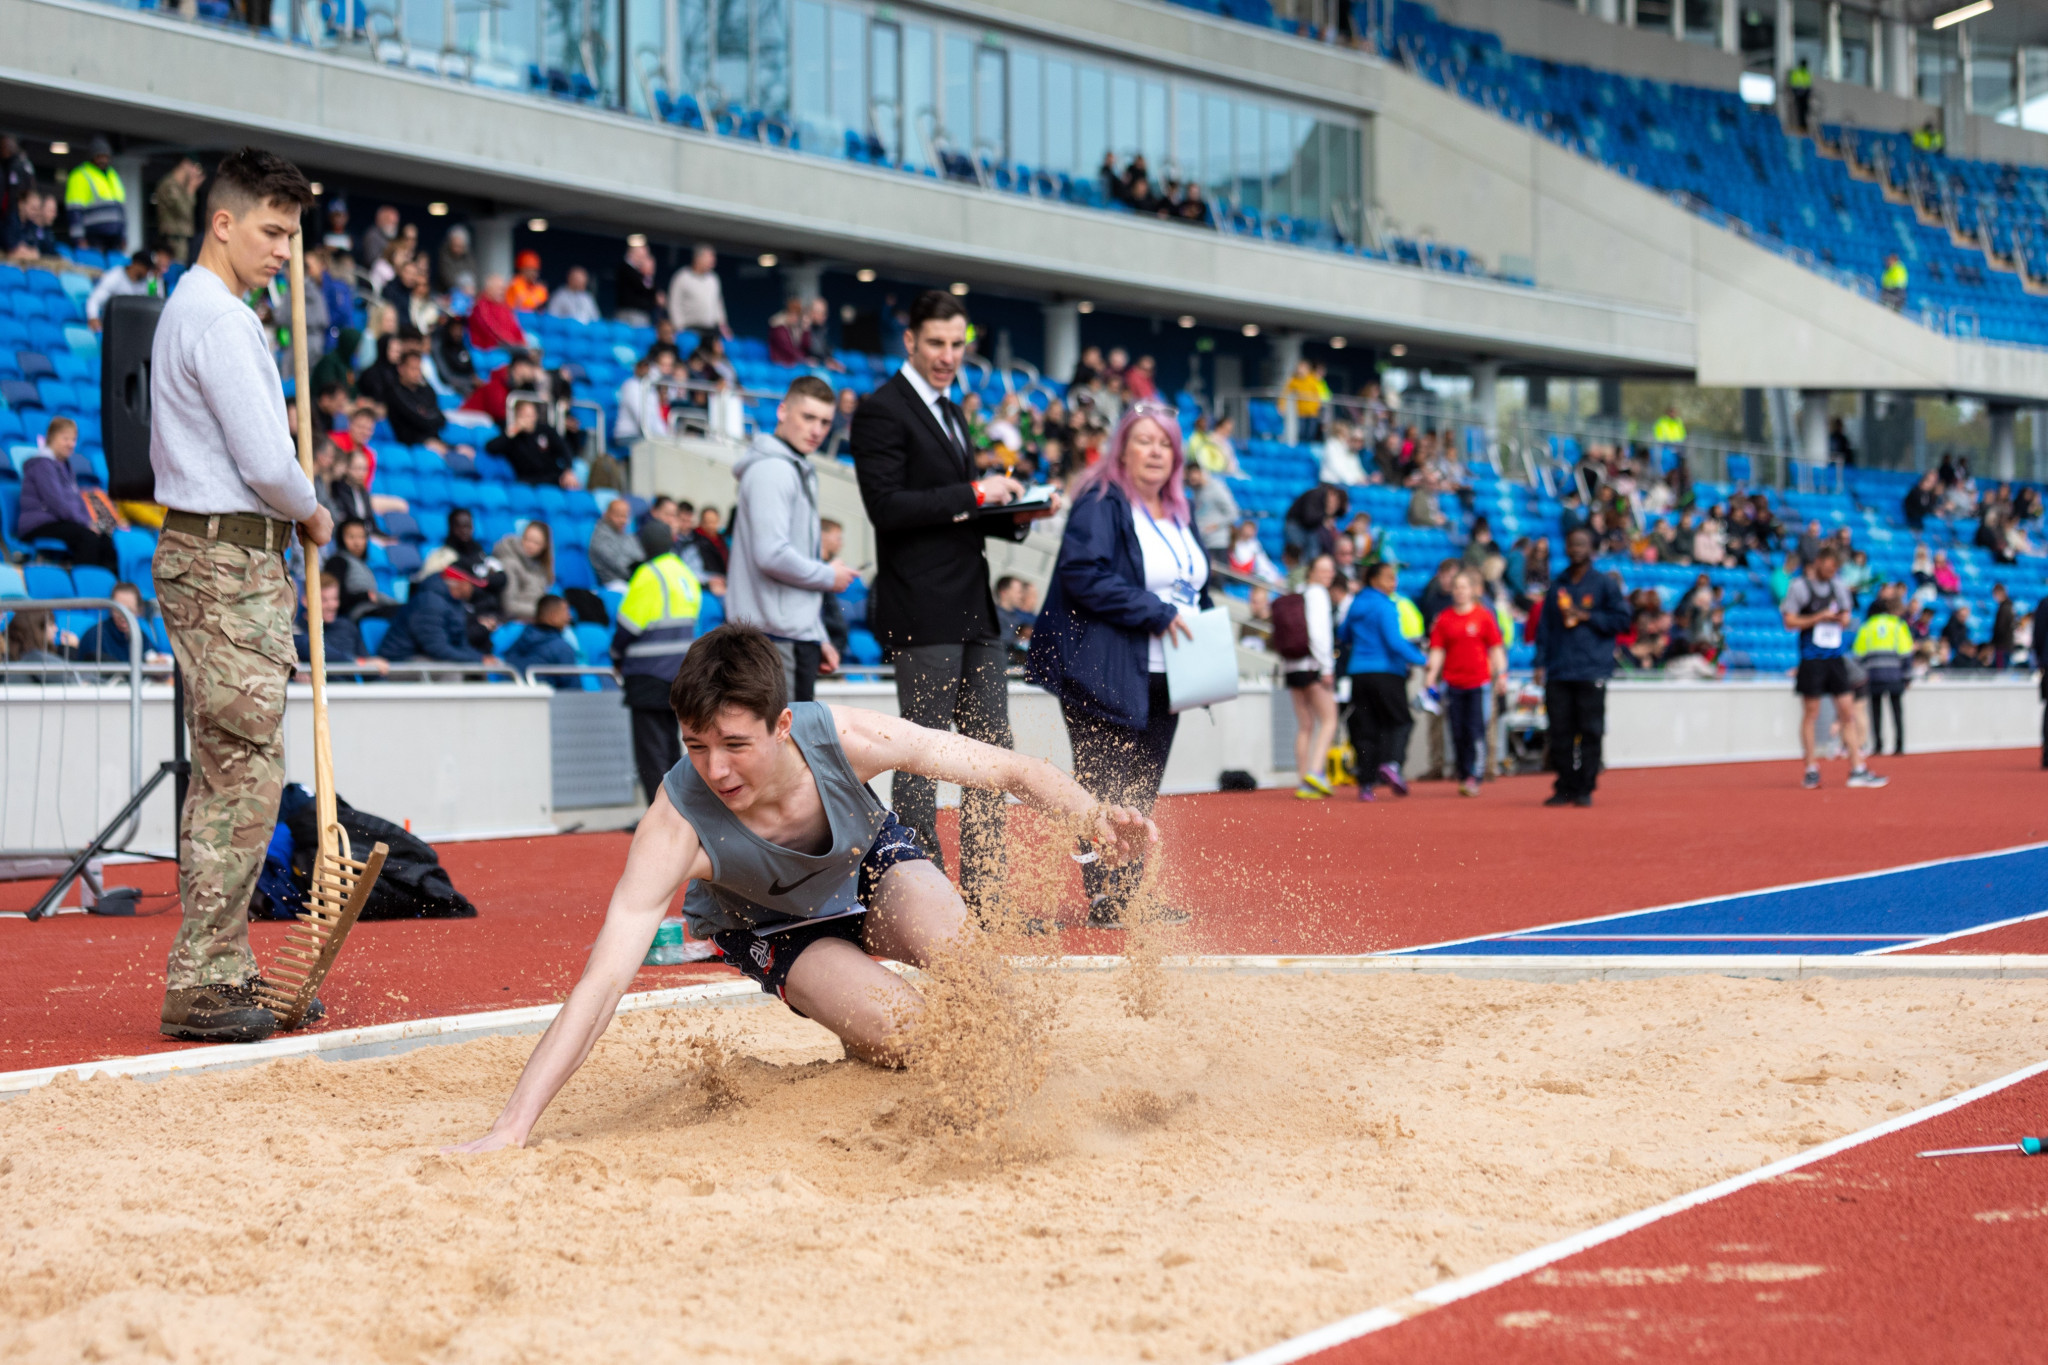 Around 350 military personnel took part in track and field events ©Birmingham City Council